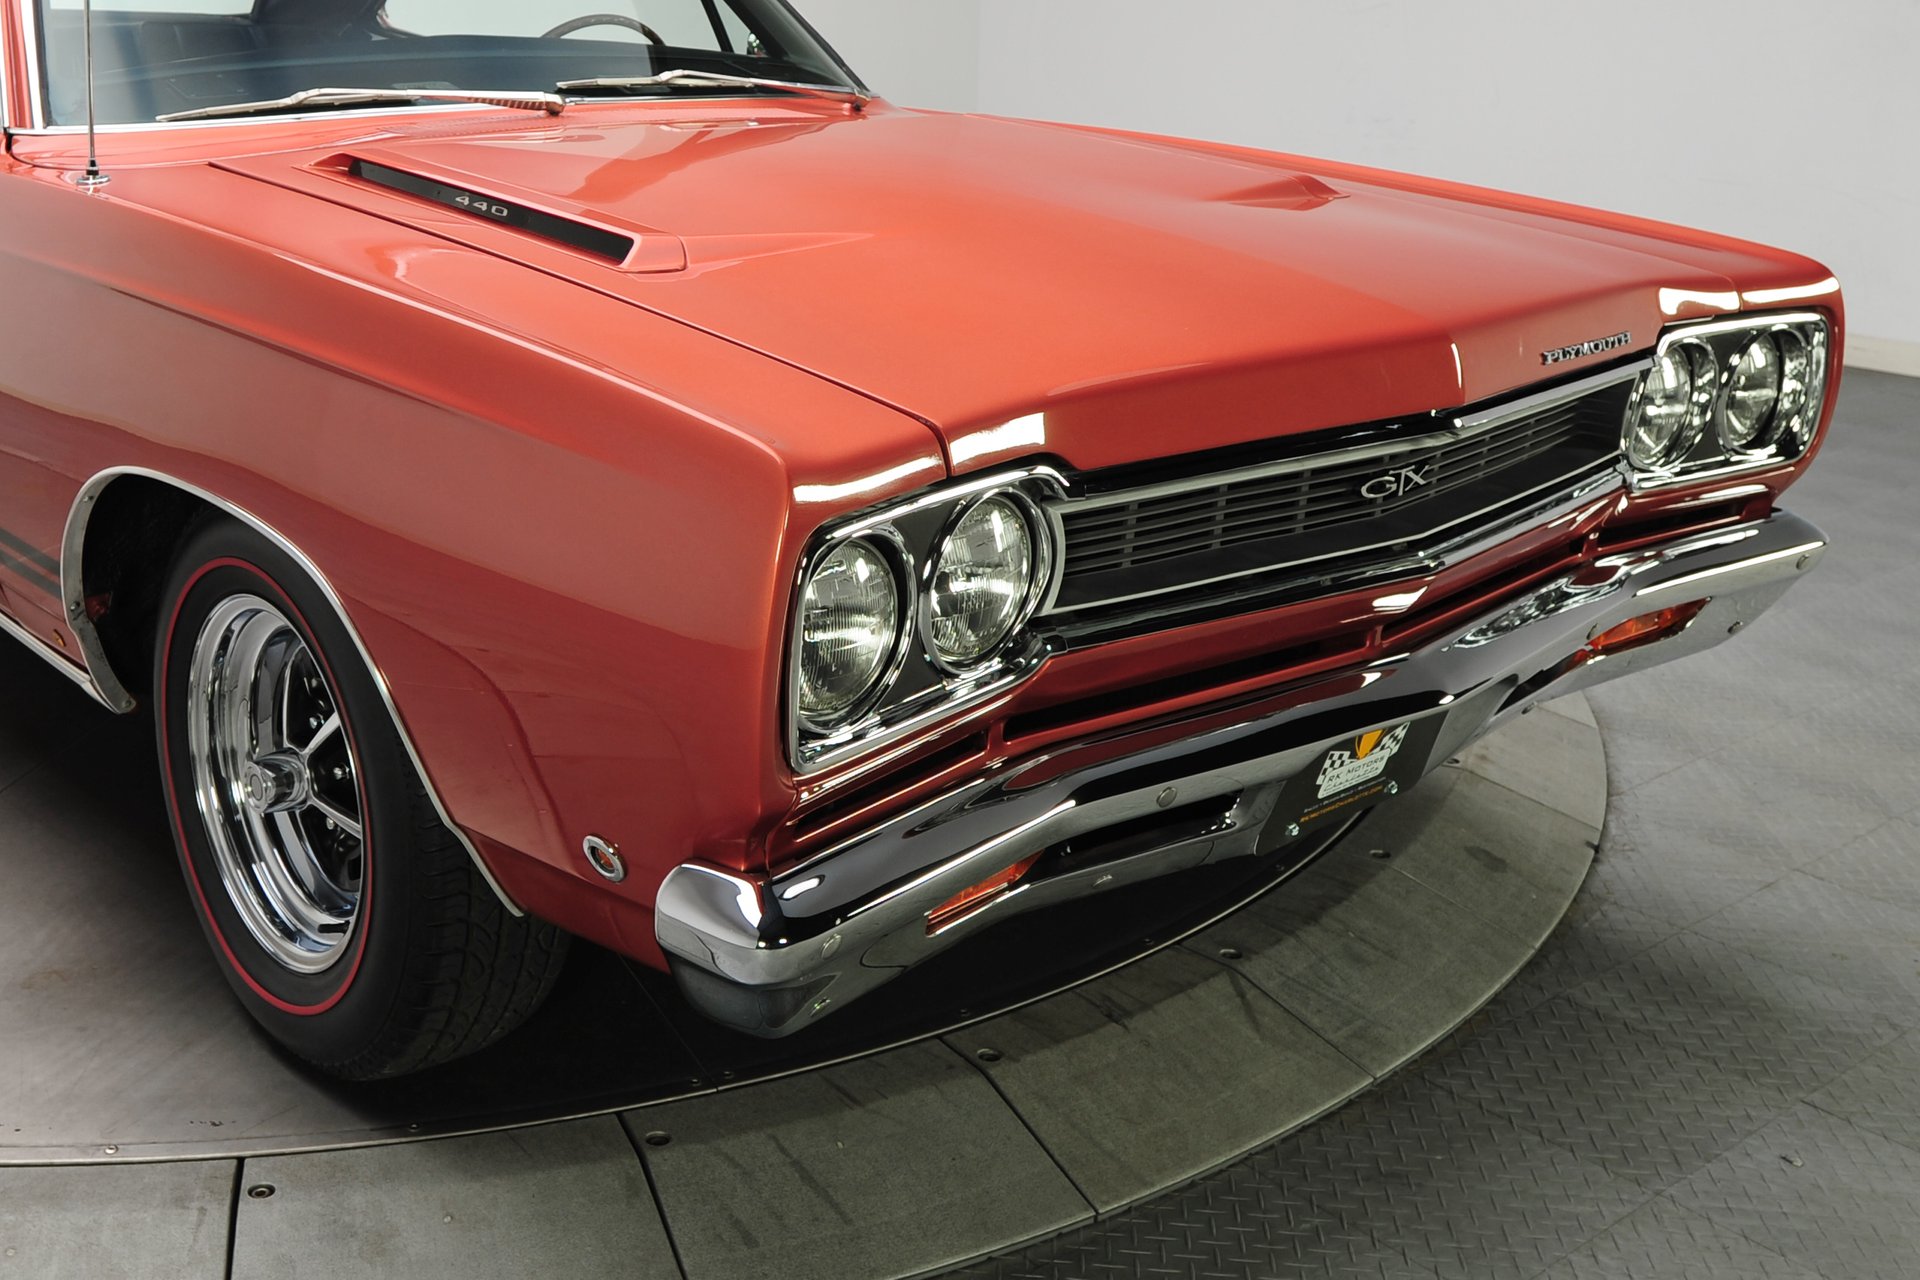 For Sale 1968 Plymouth GTX